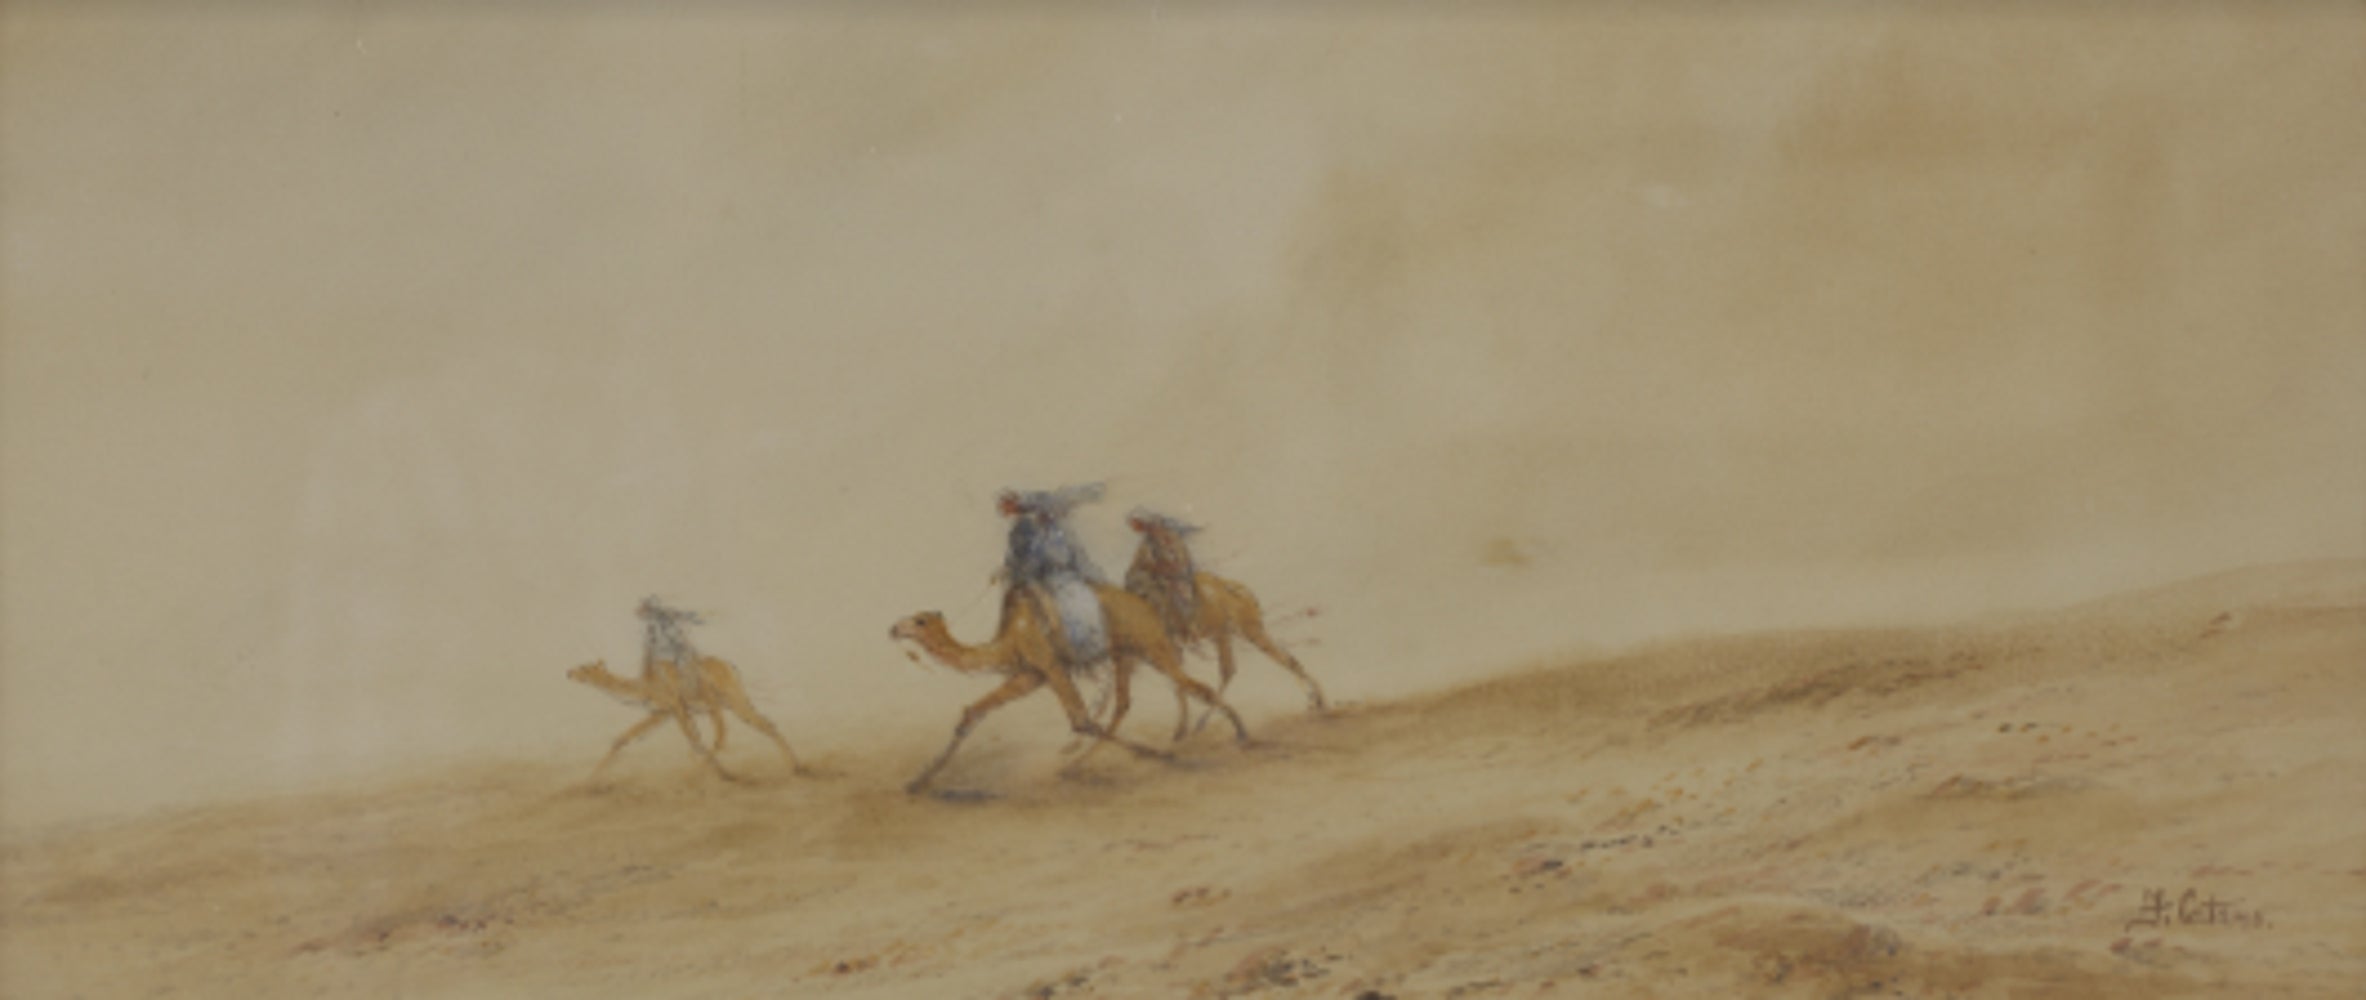 A camel train emerging from the desert  Watercolor on paper  by Raffaelle Mainella